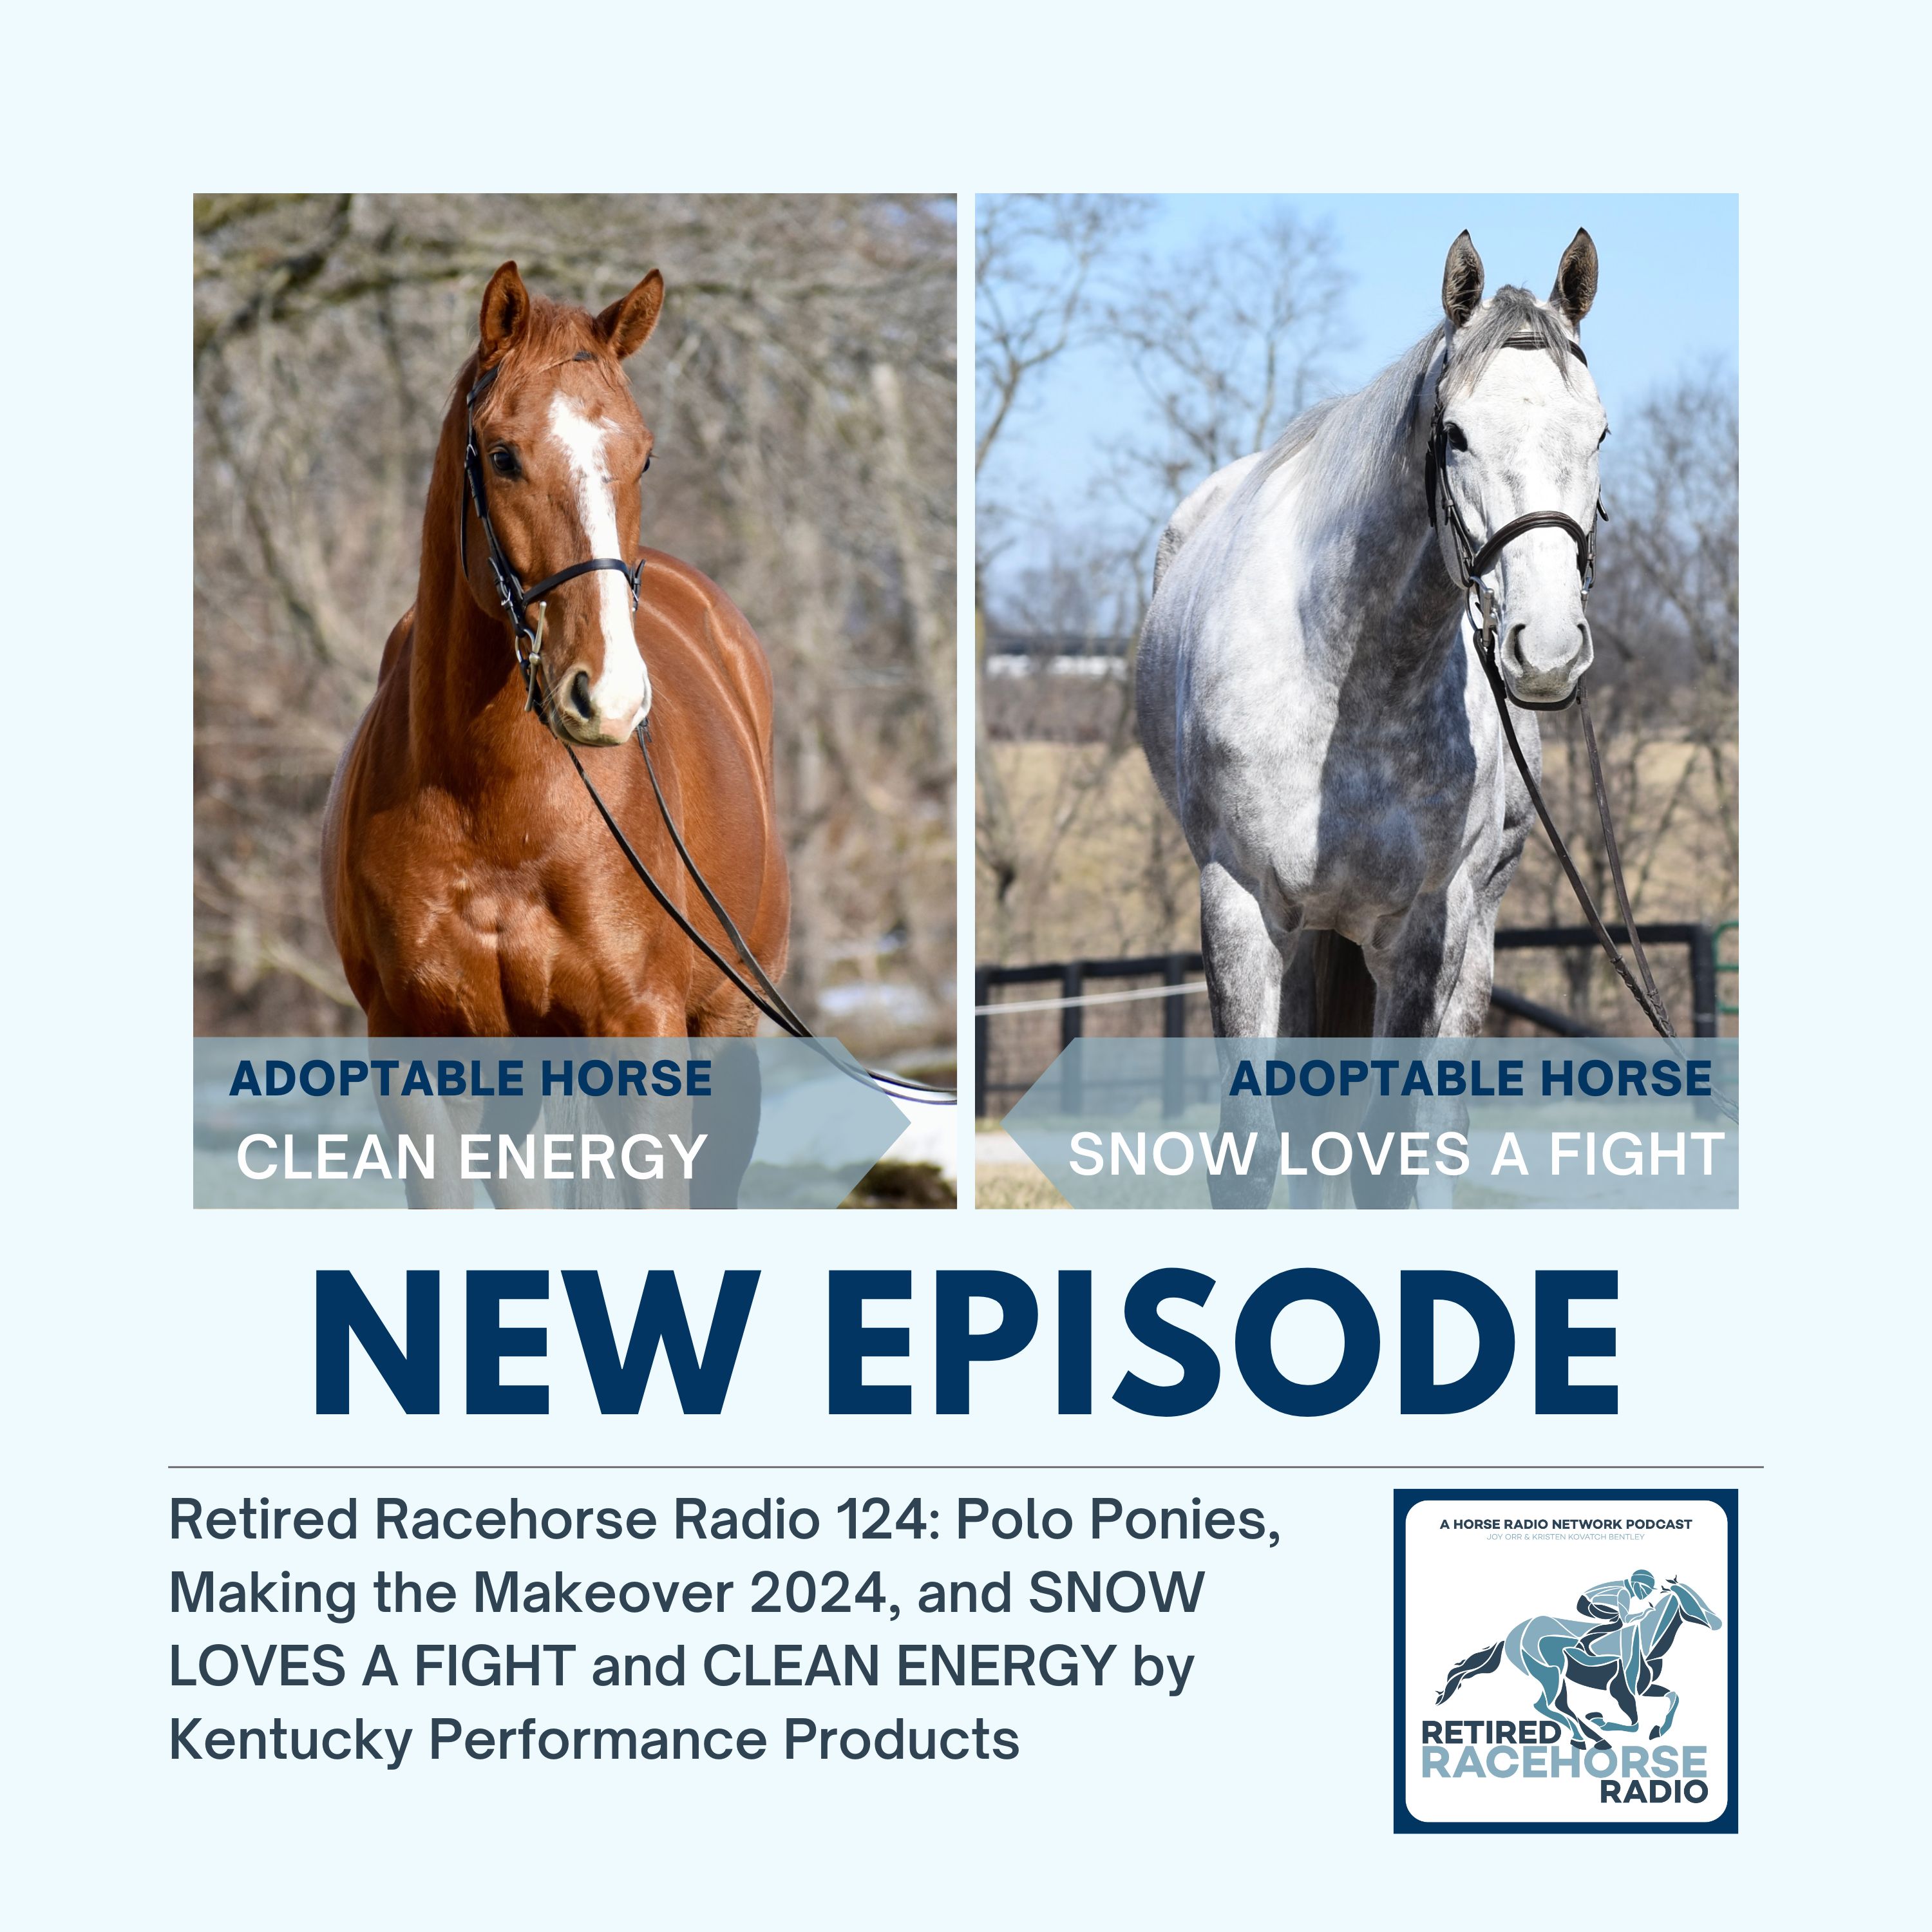 Retired Racehorse Radio 124: Polo Ponies, Making the Makeover 2024, and SNOW LOVES A FIGHT and CLEAN ENERGY by Kentucky Performance Products